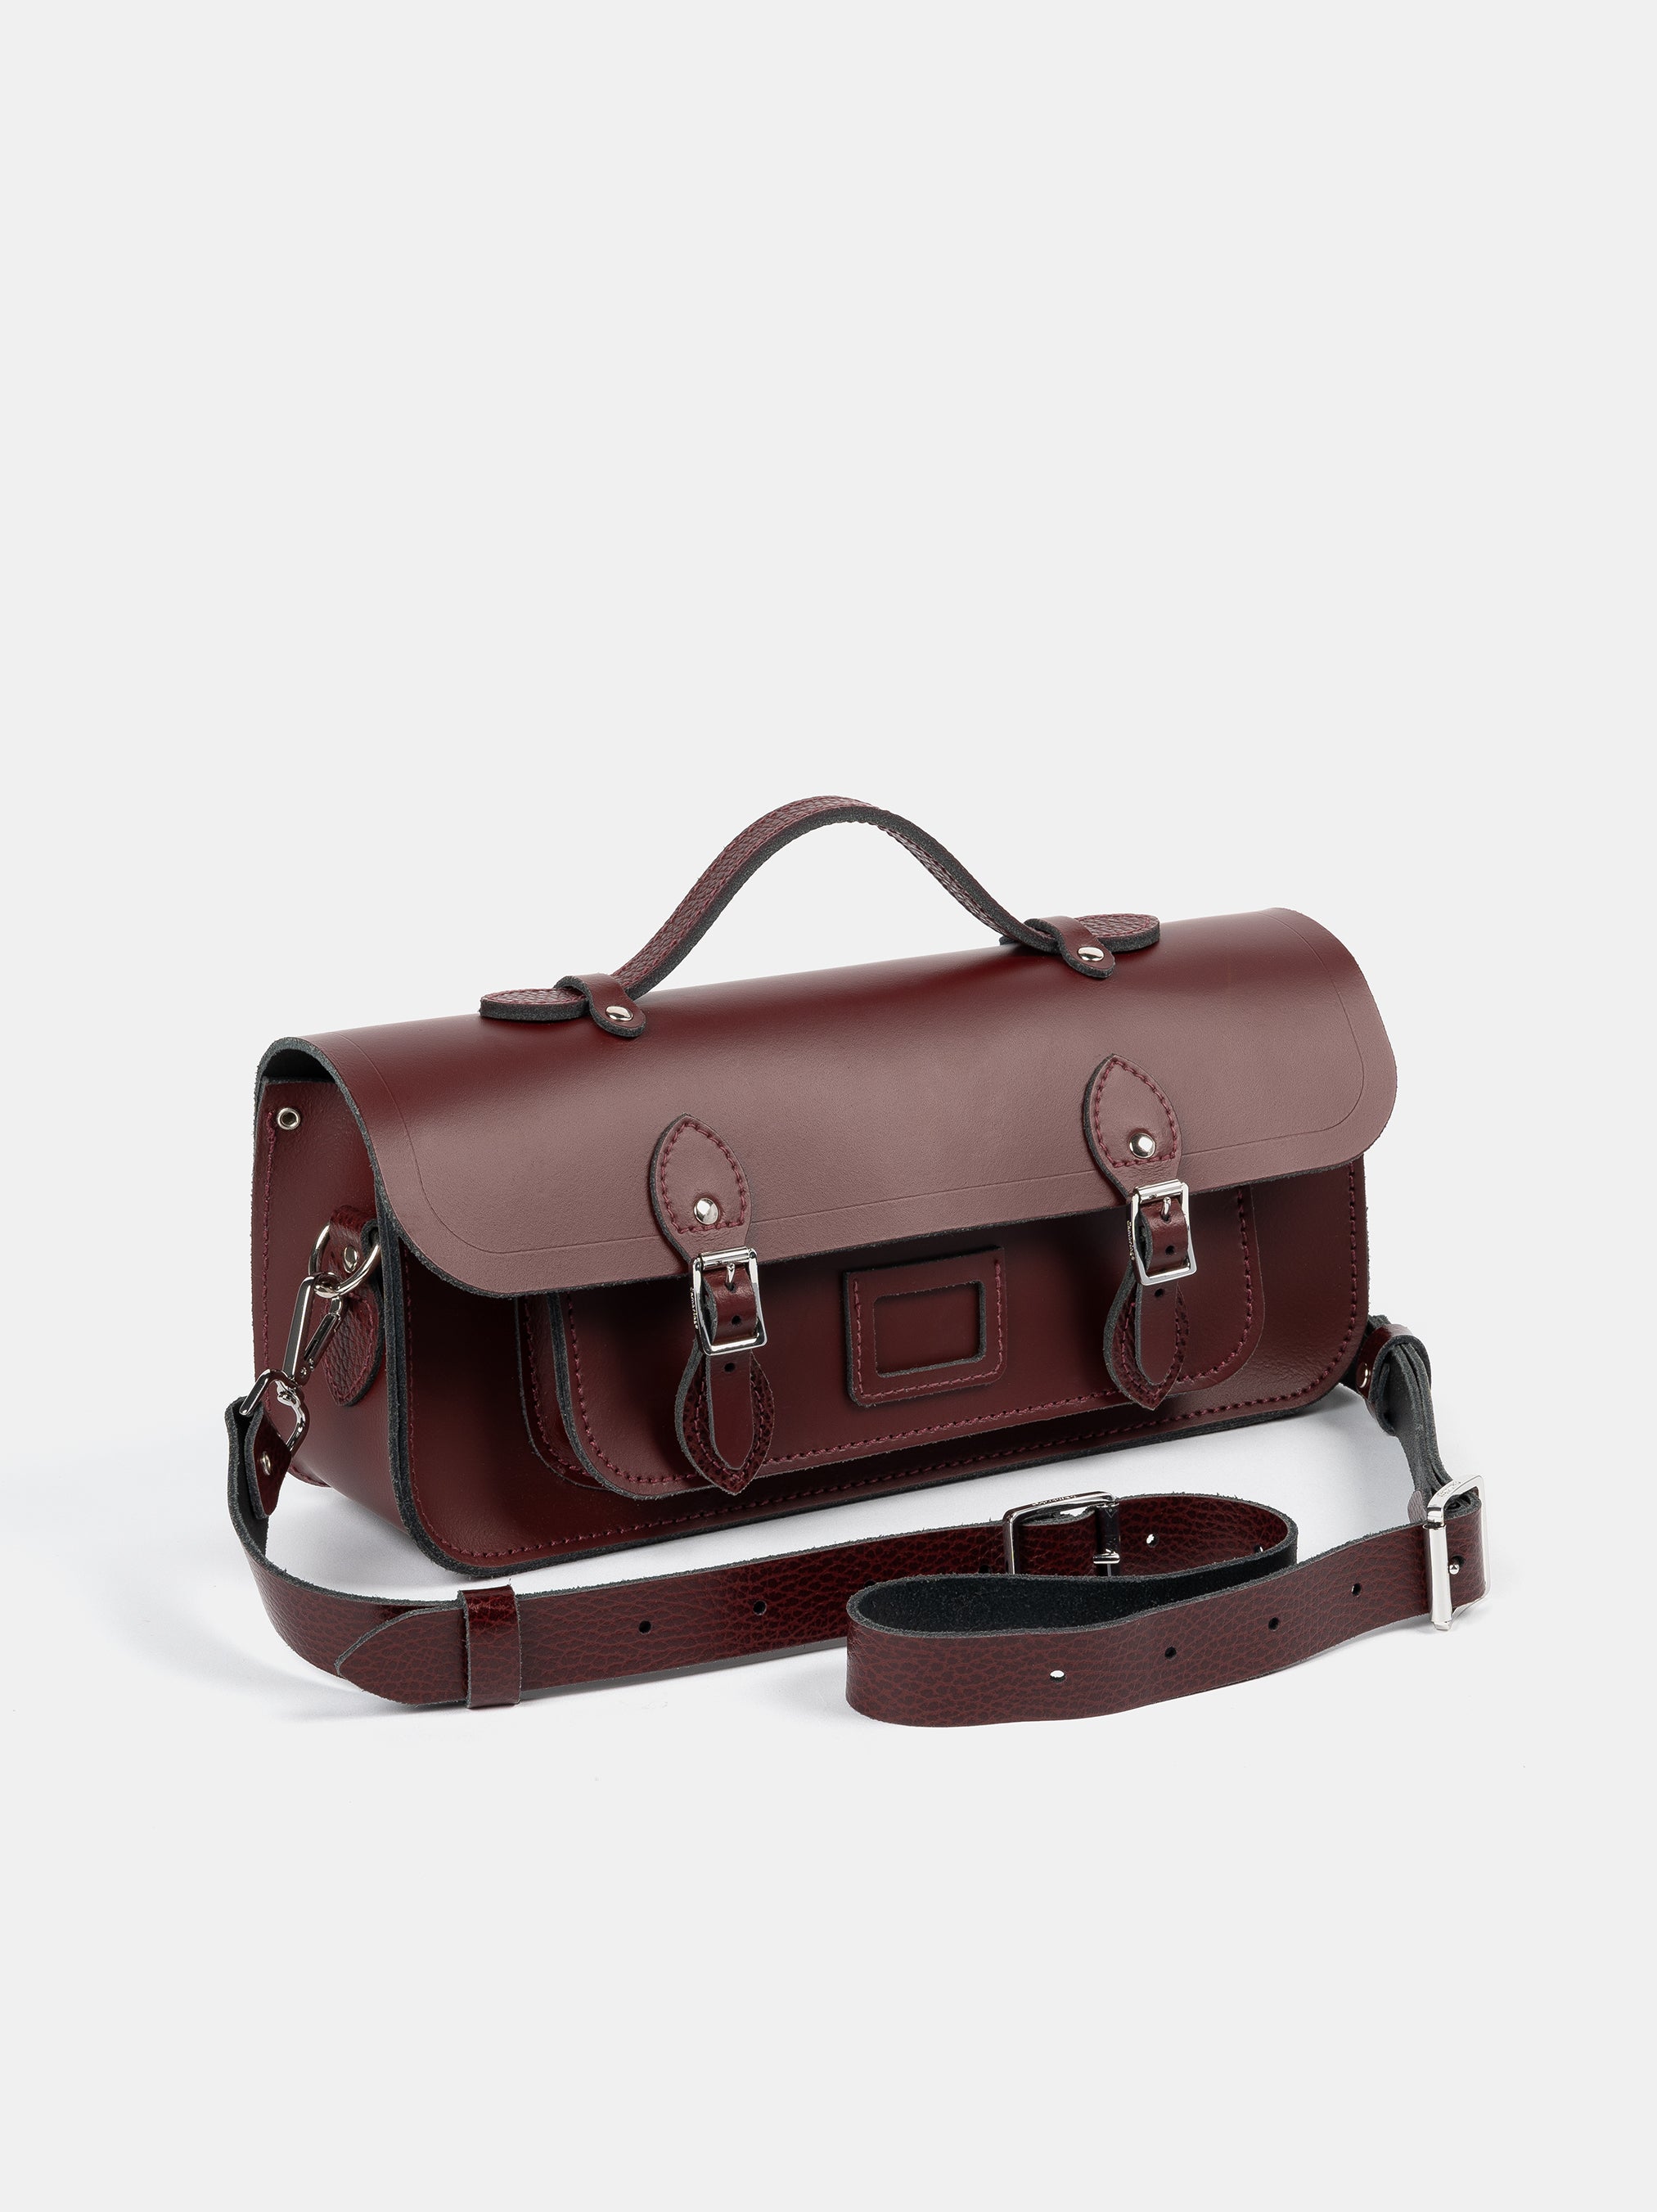 Long Leather Satchel with Magnetic Closure in Oxblood Angle Shot